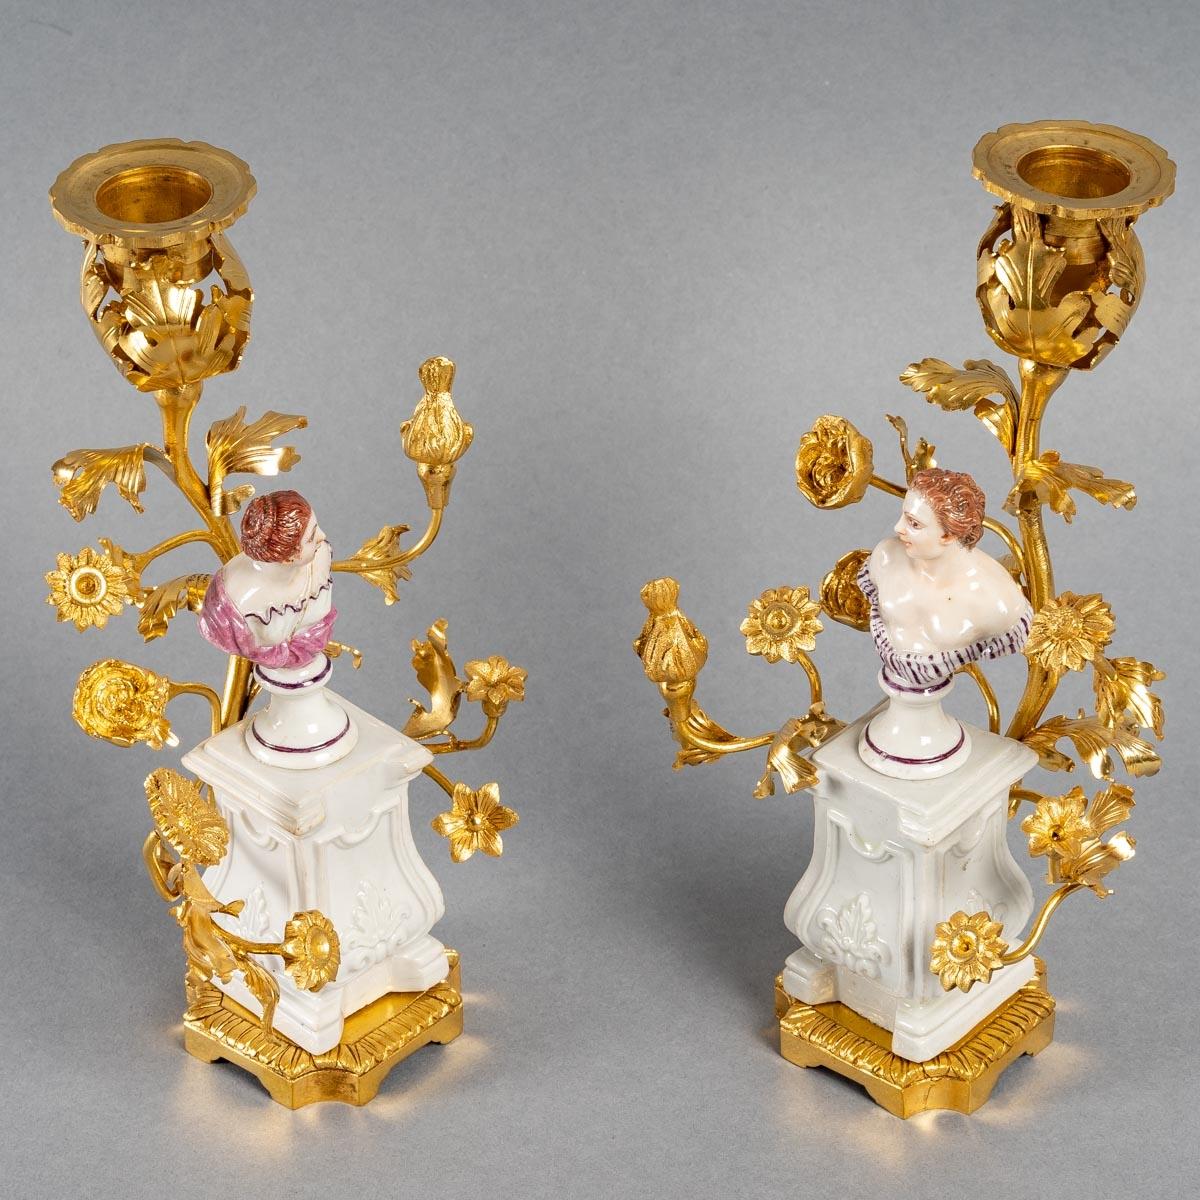 Pair of bronze candlesticks, Louis XV

Nice pair of 18th century gilt bronze and porcelain candlesticks from Italy,

The frame dates from the 19th century

Dimensions: H: 20cm, W: 11cm, D: 5cm.